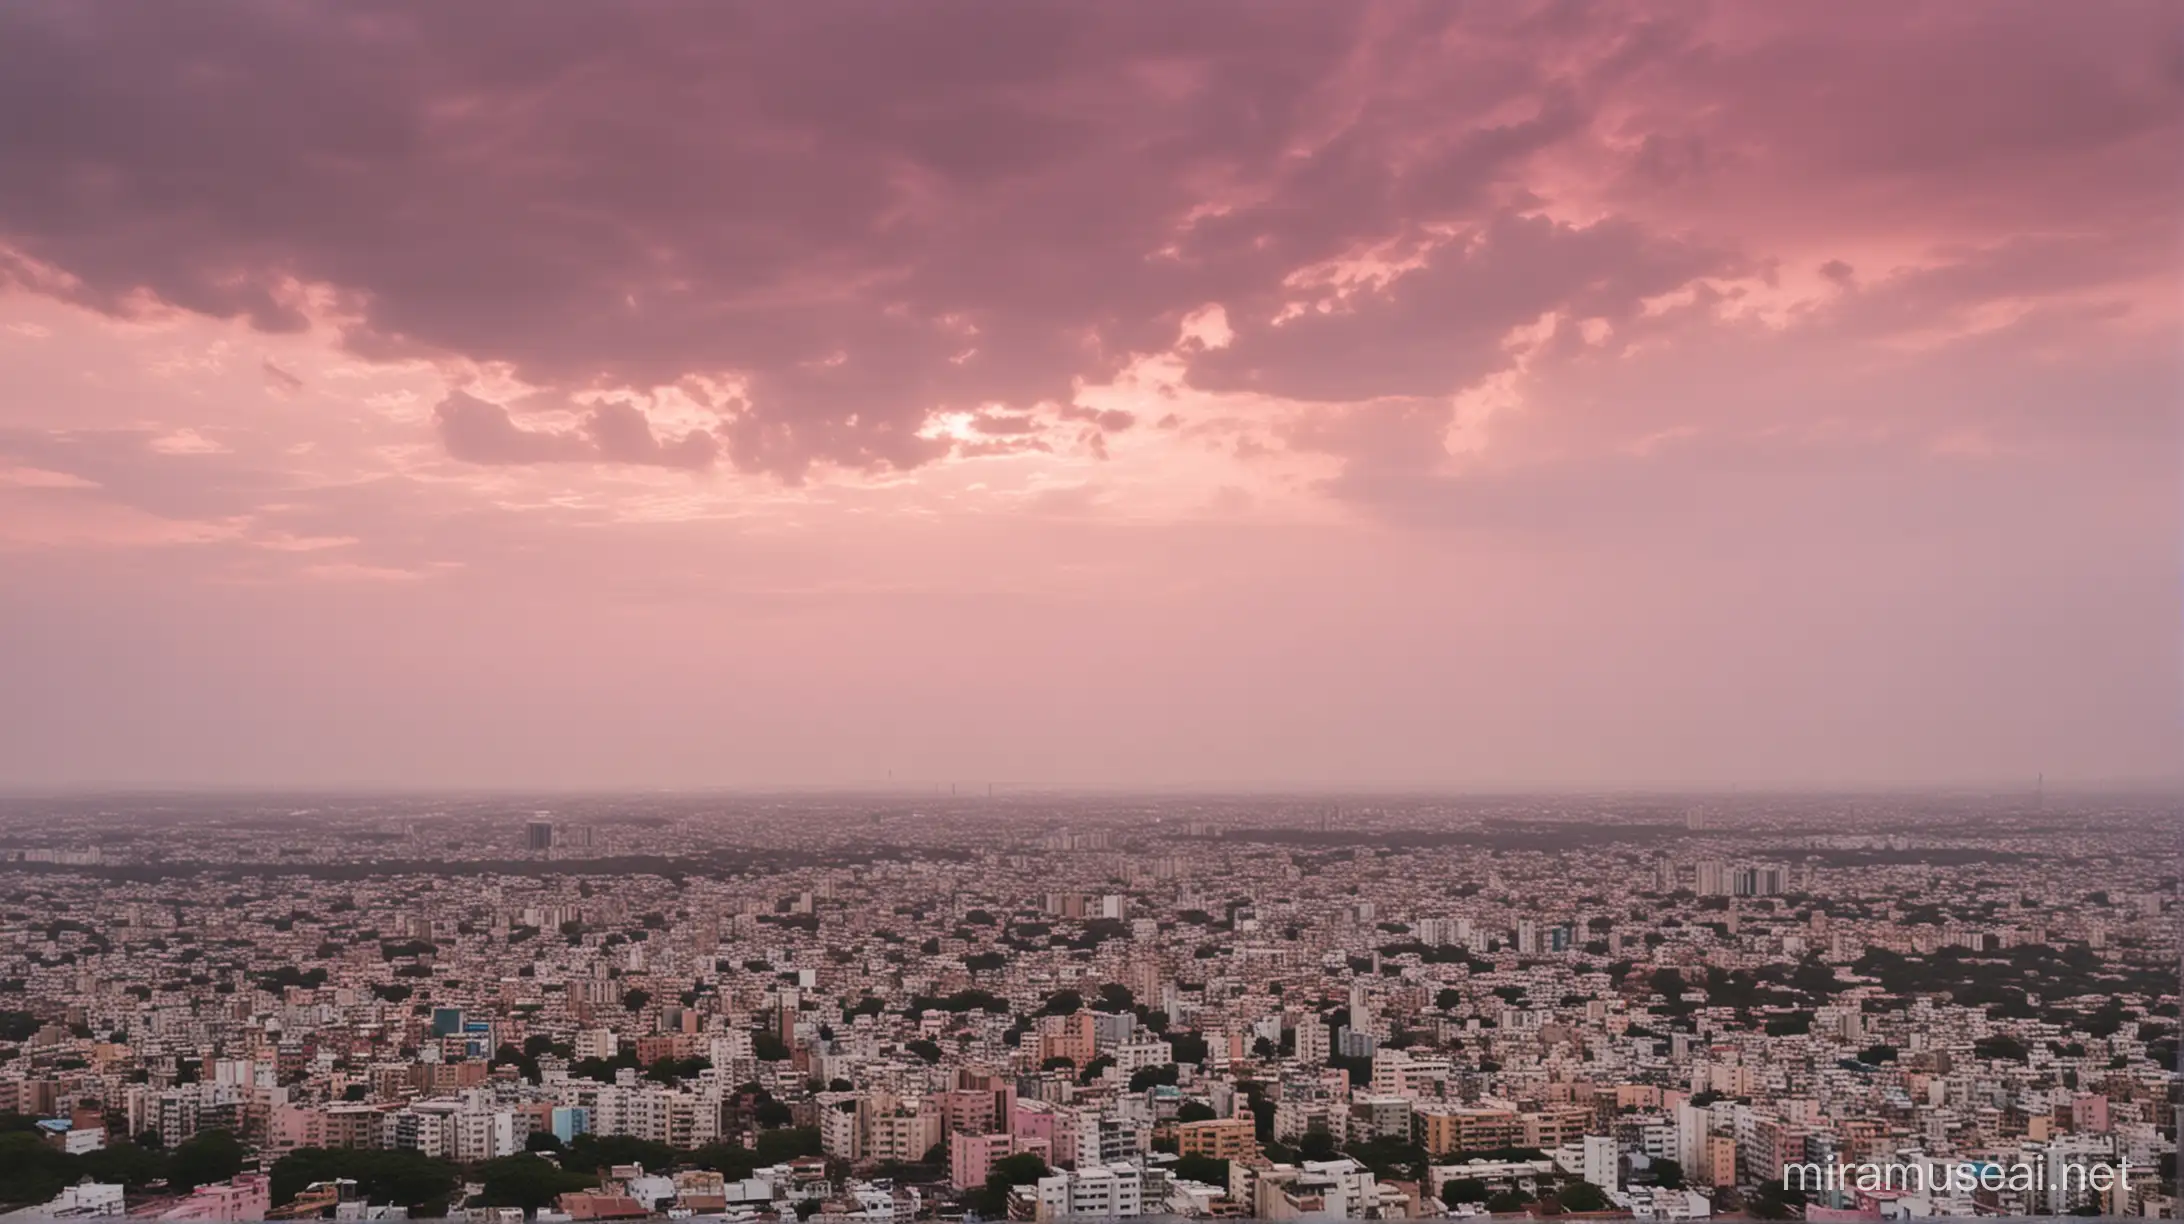 cinematic extreme wide shot of hyderabad city scape with pink sky and cloudy atmosphere